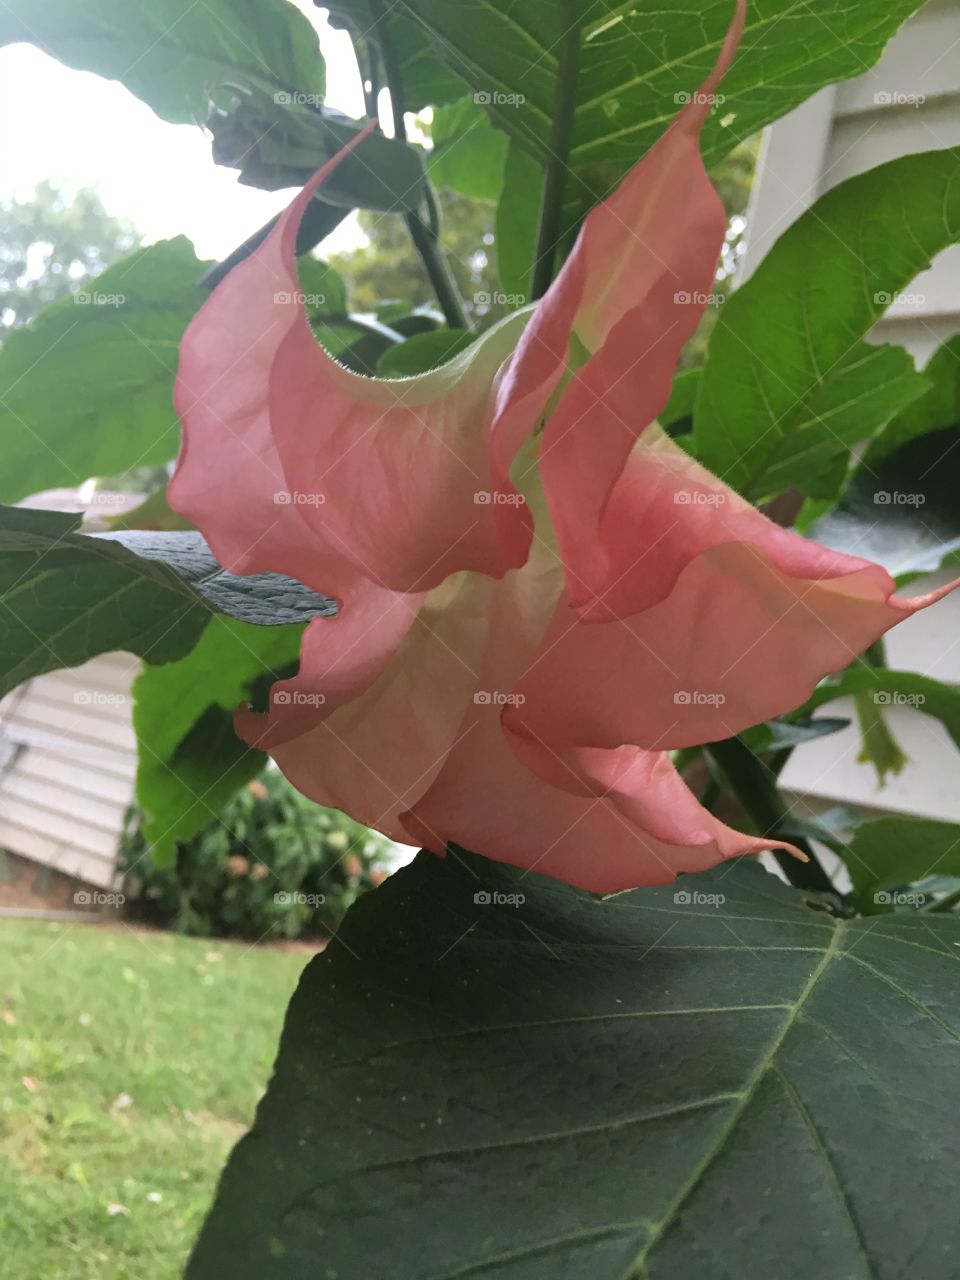 My close up of my beautiful angel trumpet flower love waking up to little surprises!